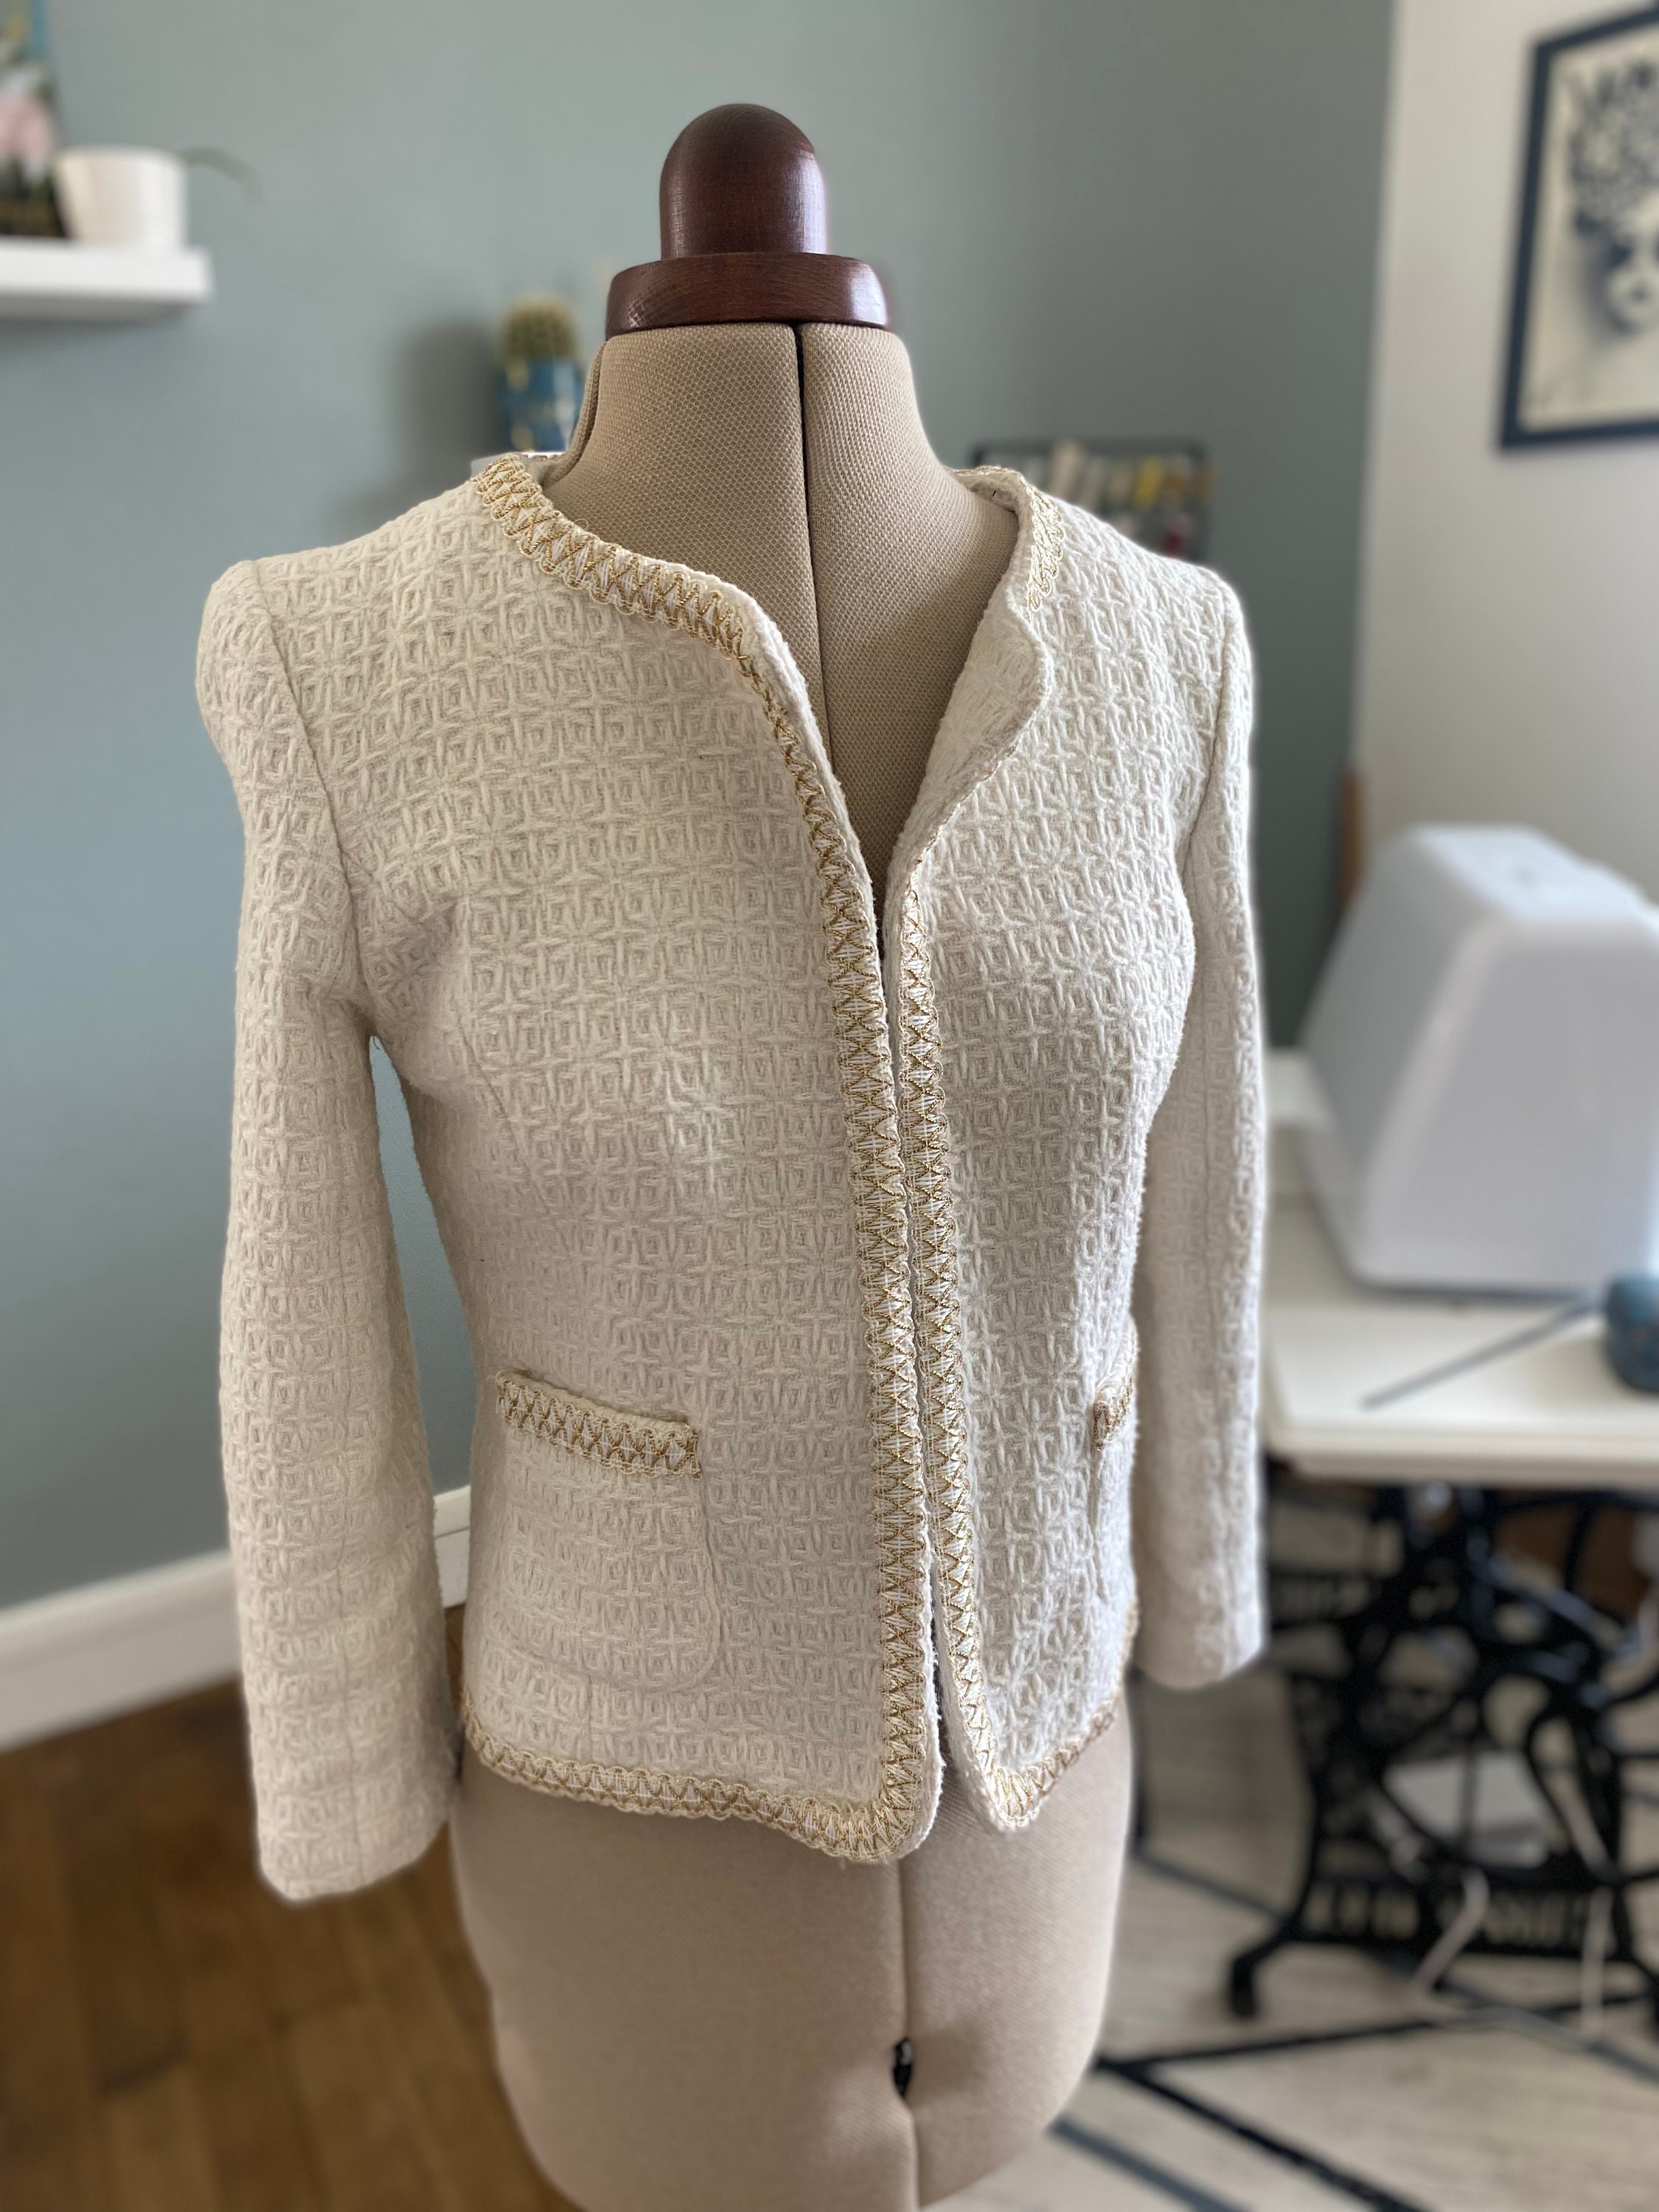 Roman Gold Buttoned Double Breasted Tweed Jacket